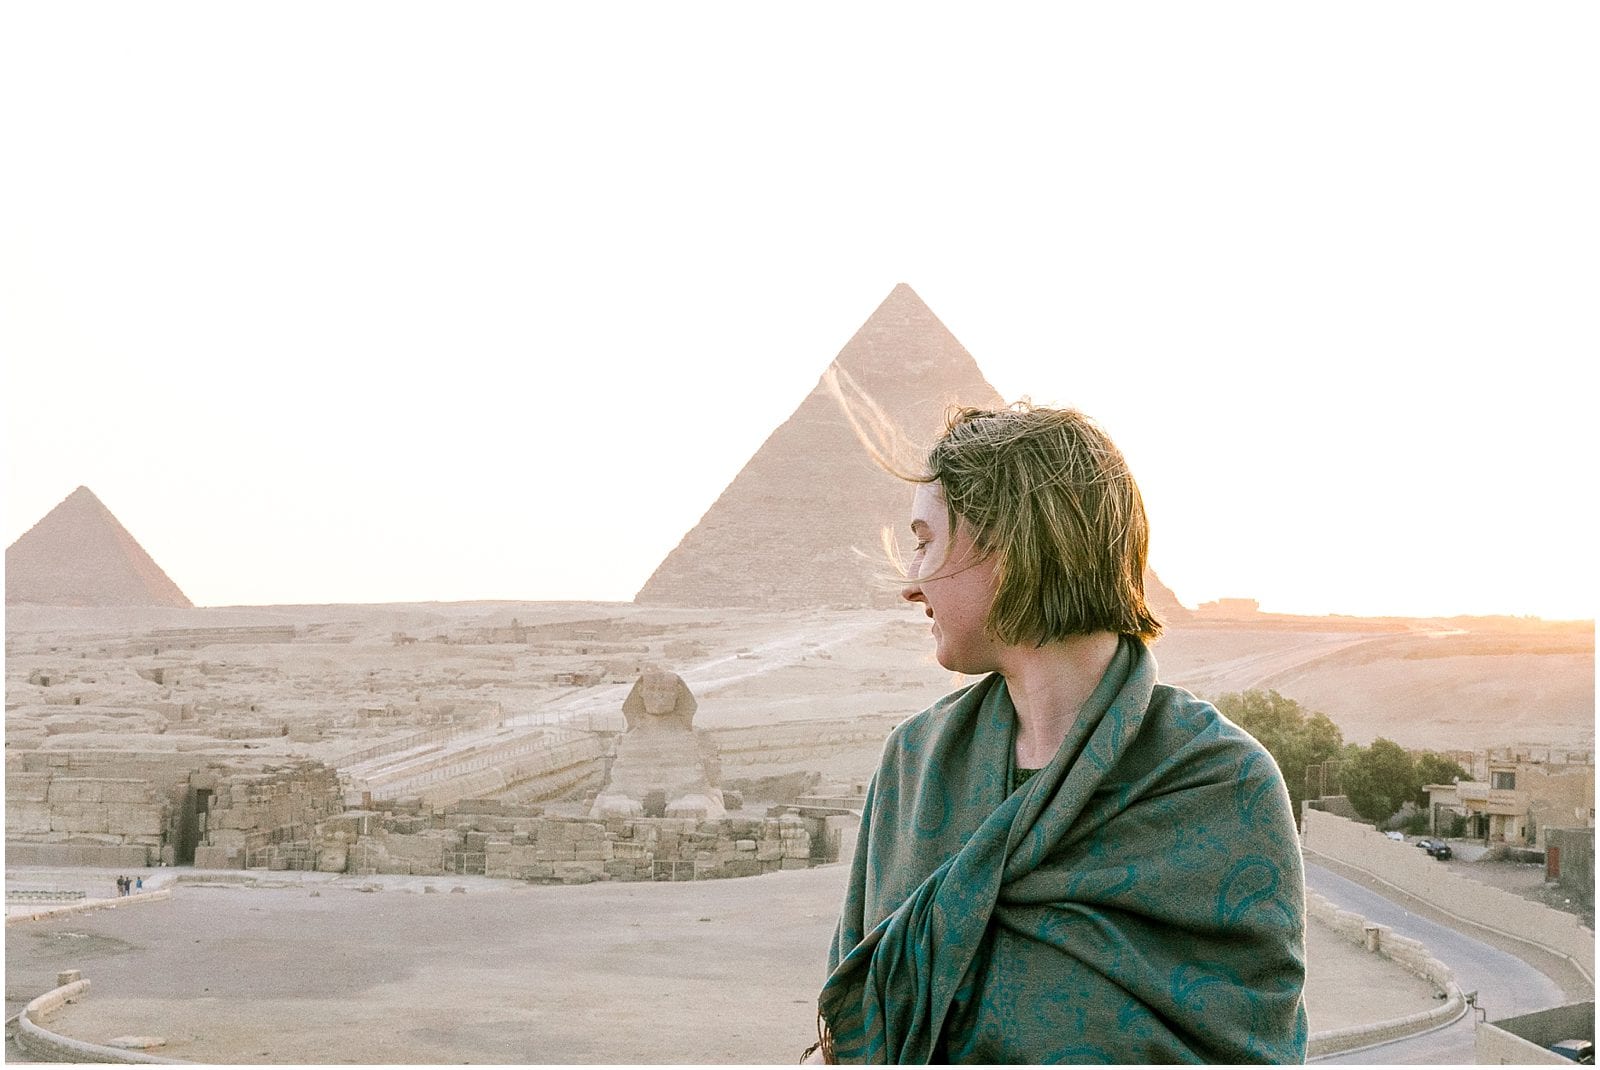 Woman in shawl at Pyramids of Giza in Cairo Egypt Sphinx